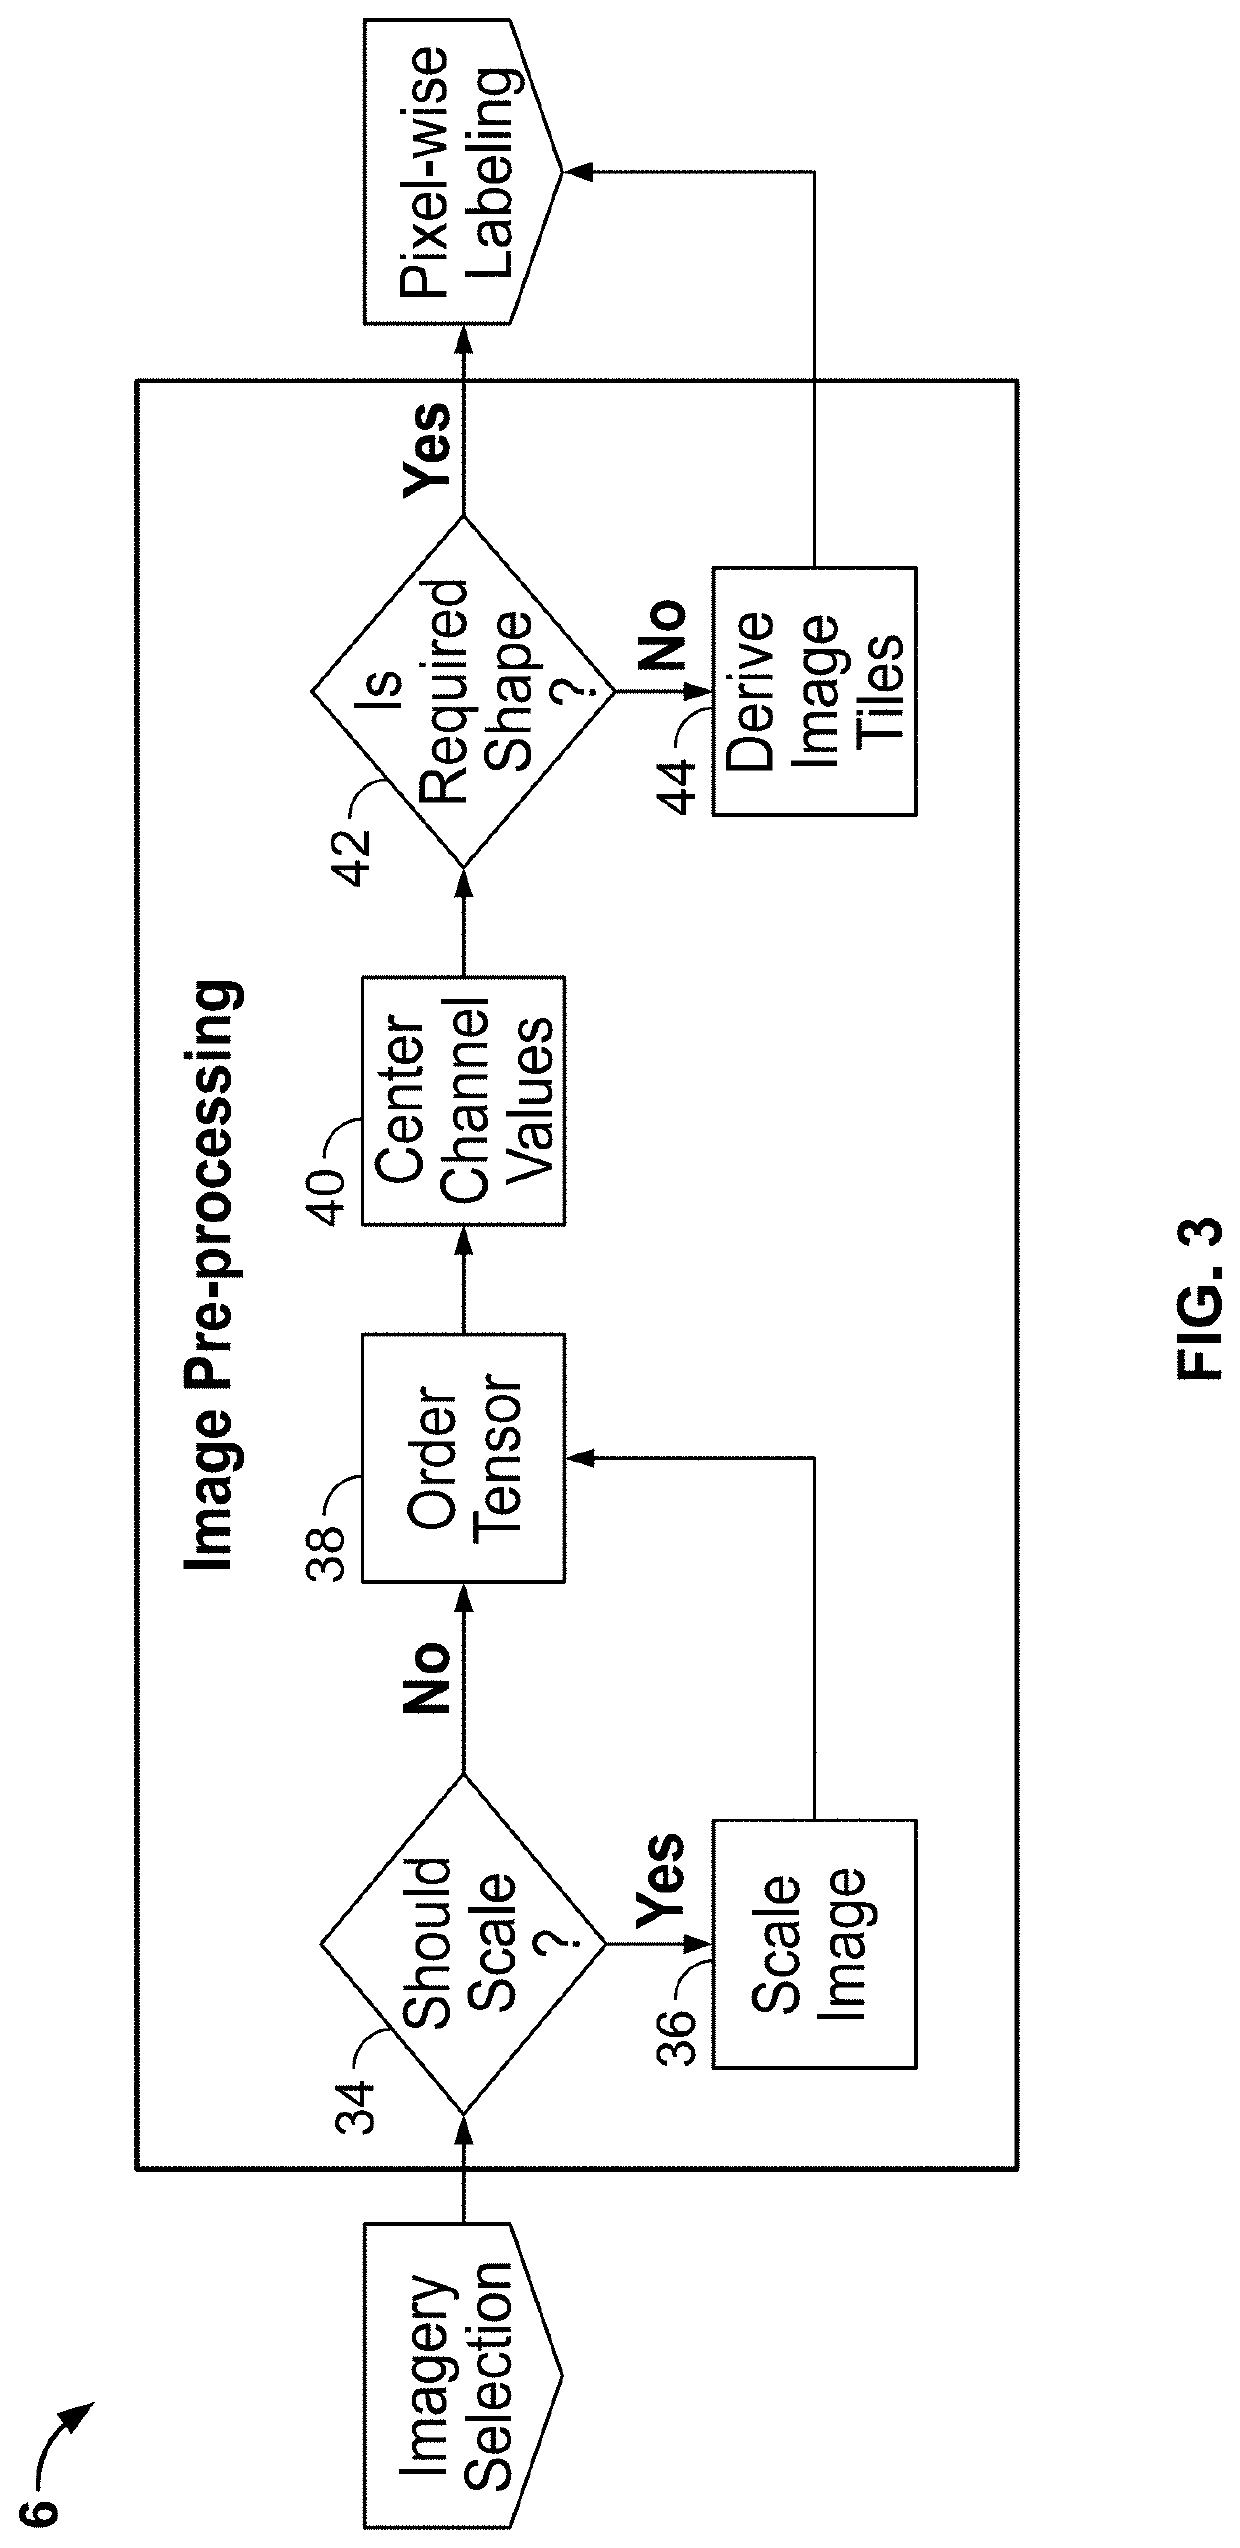 Computer vision systems and methods for geospatial property feature detection and extraction from digital images